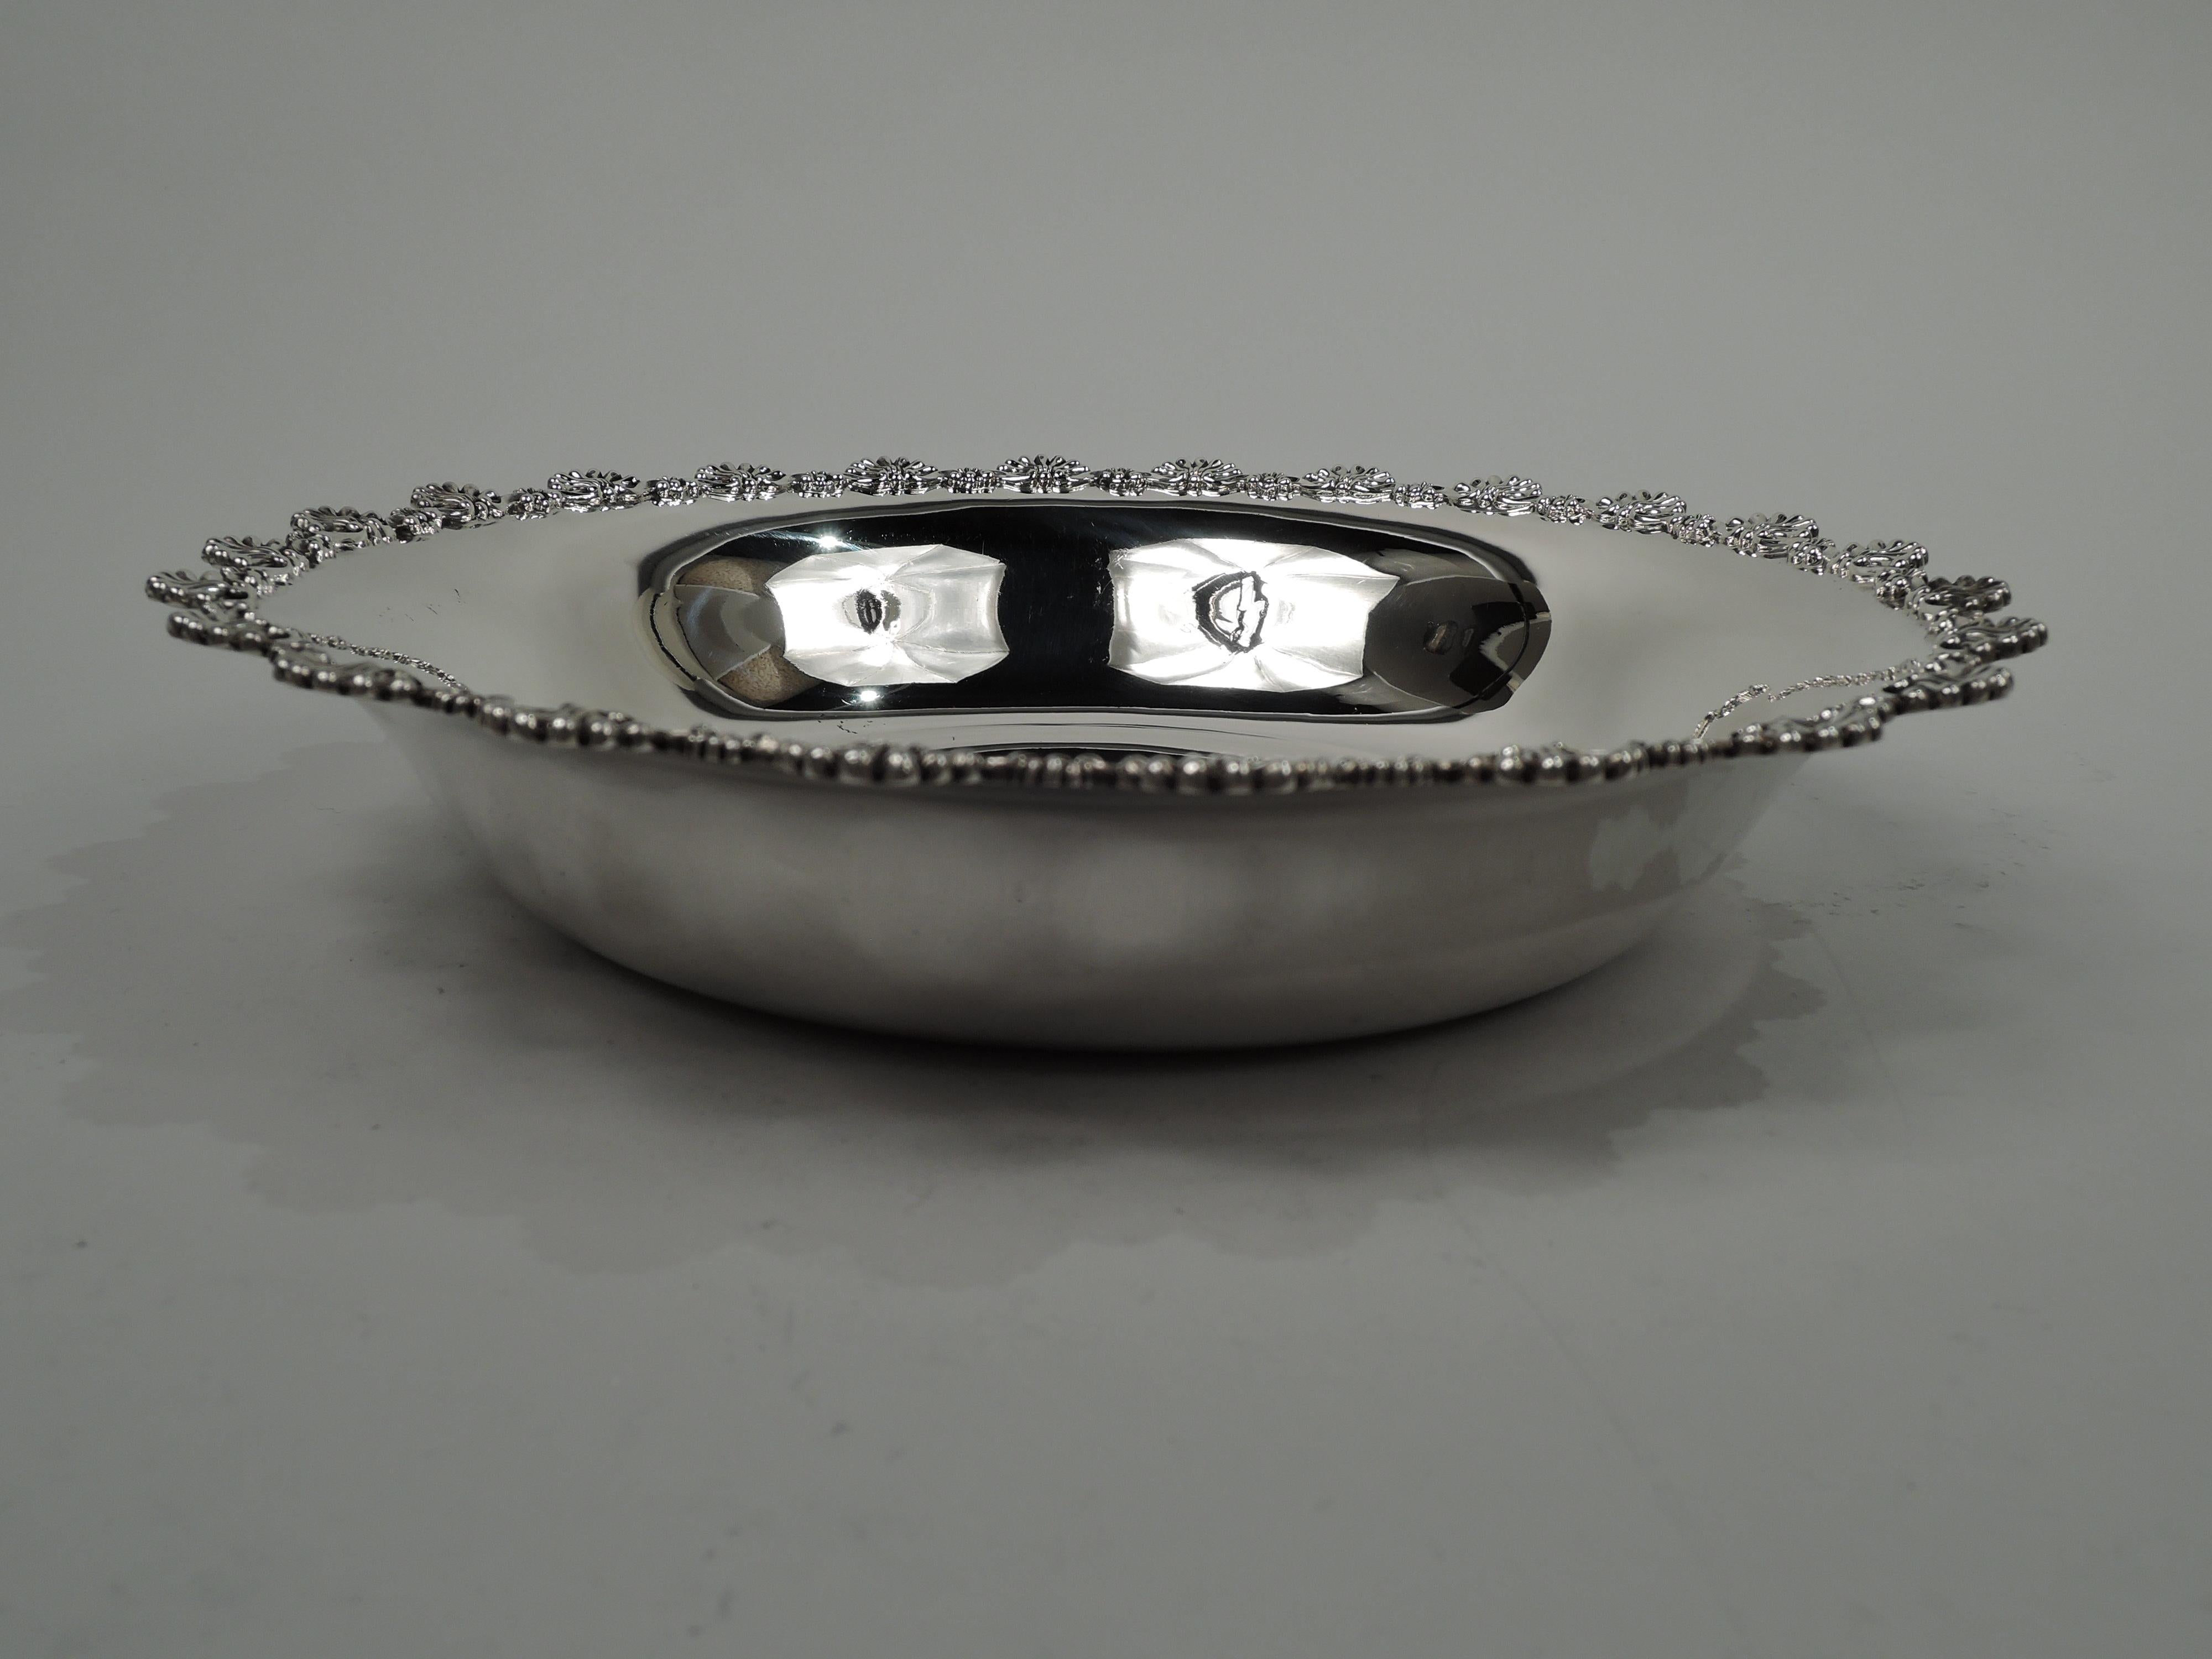 Victorian Classical sterling silver bowl. Made by Dominick & Haff in New York in 1895. Round with tapering sides. Applied and cast rim comprising alternating large and small scallop shows. Fully marked including dated maker’s and retailer’s (Rand &